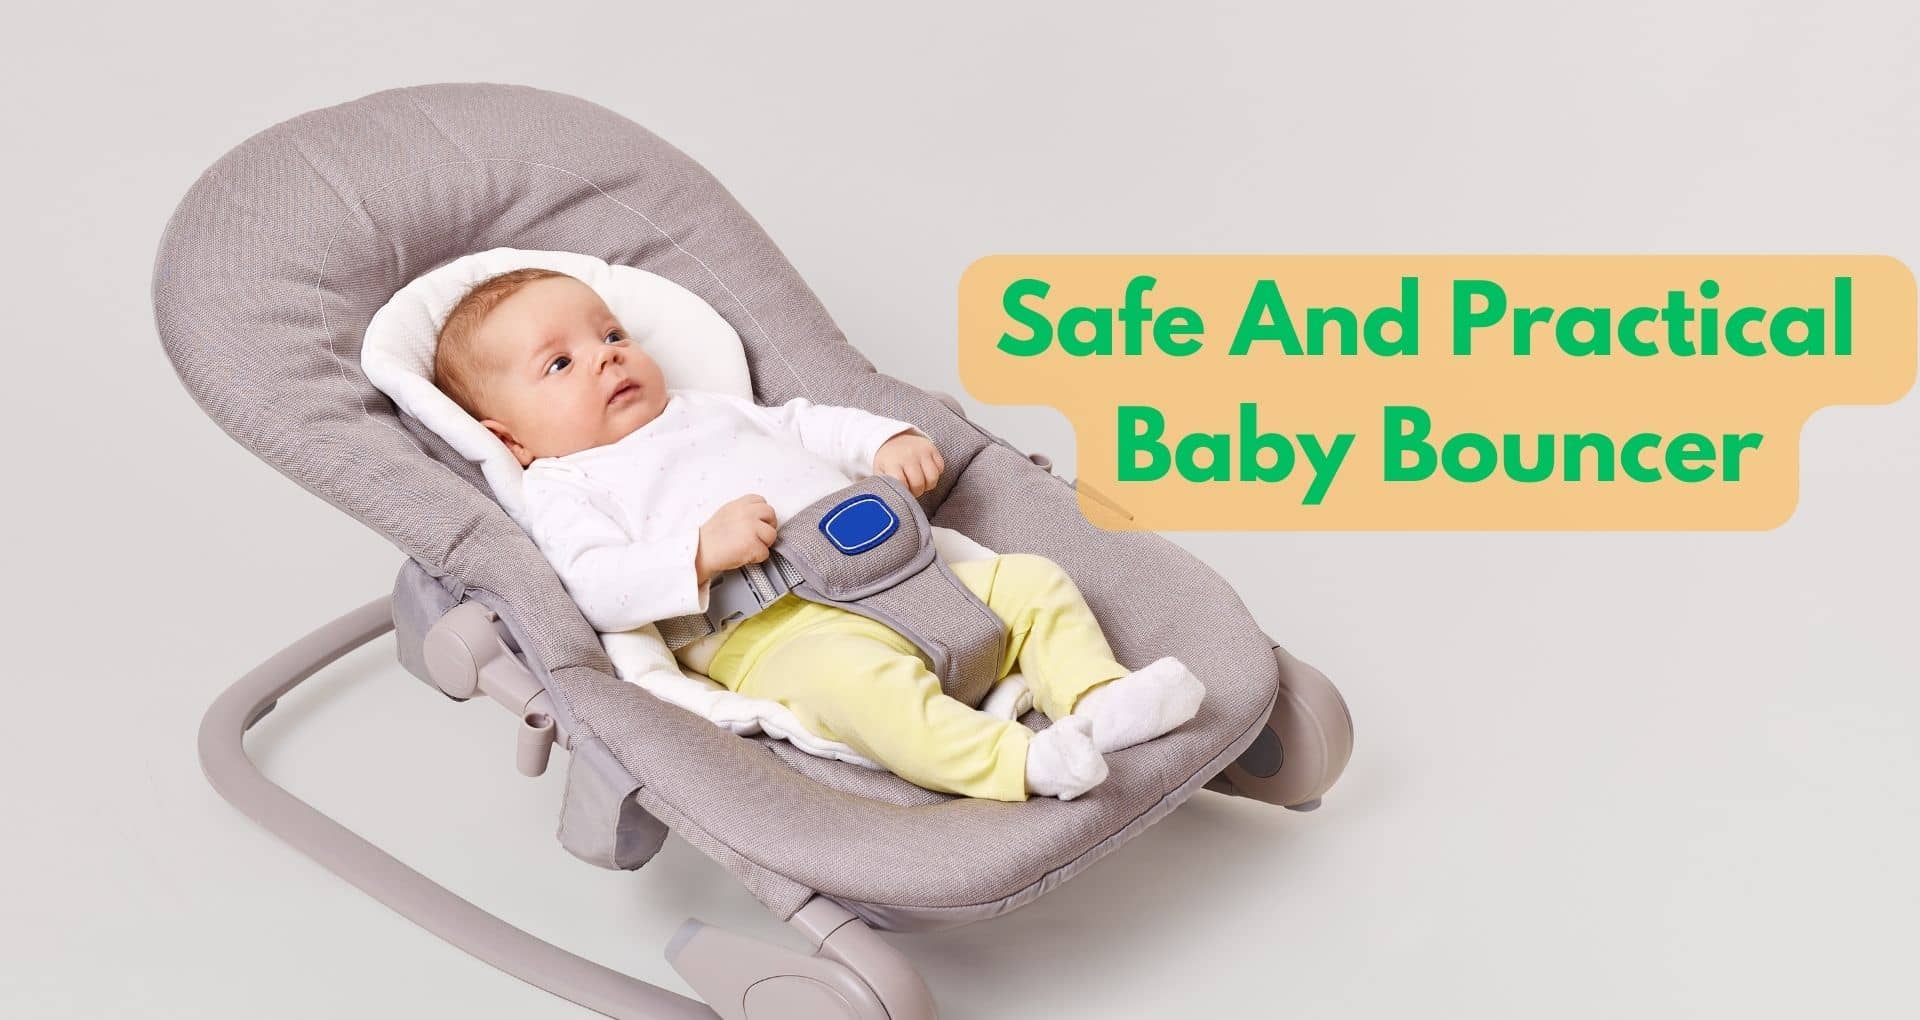 How Do I Select A Safe And Practical Baby Bouncer?